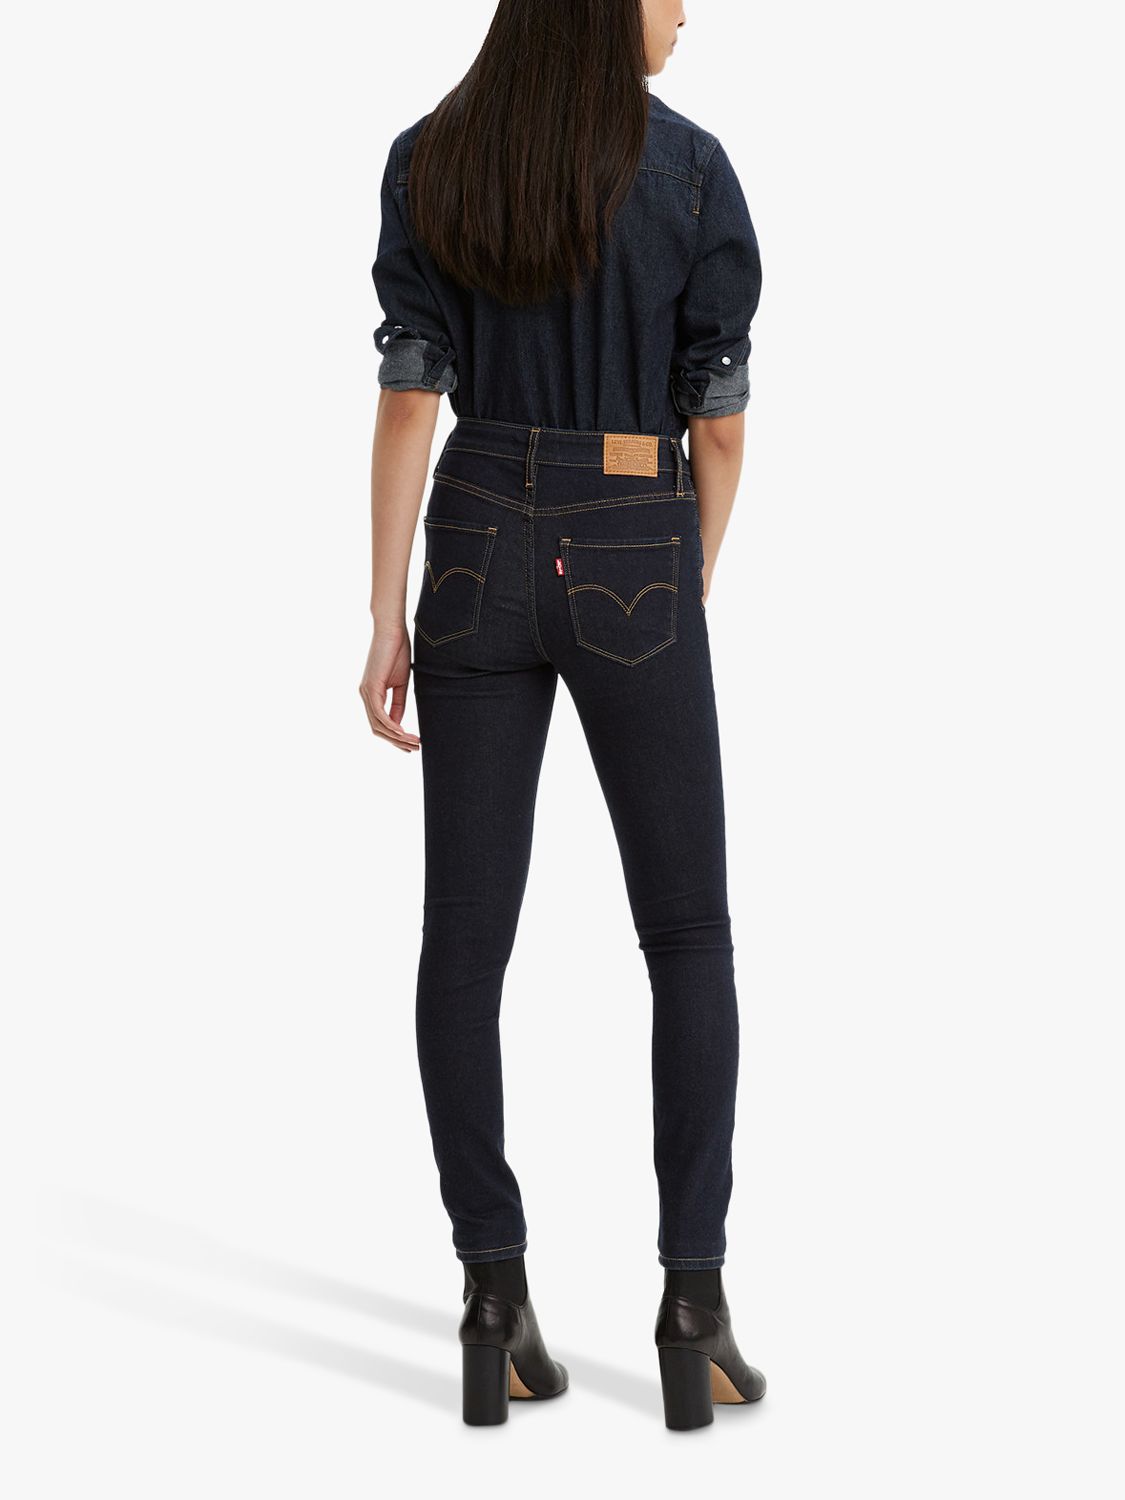 Levi's 721 High Rise Skinny Jeans, To The Nine at John Lewis & Partners